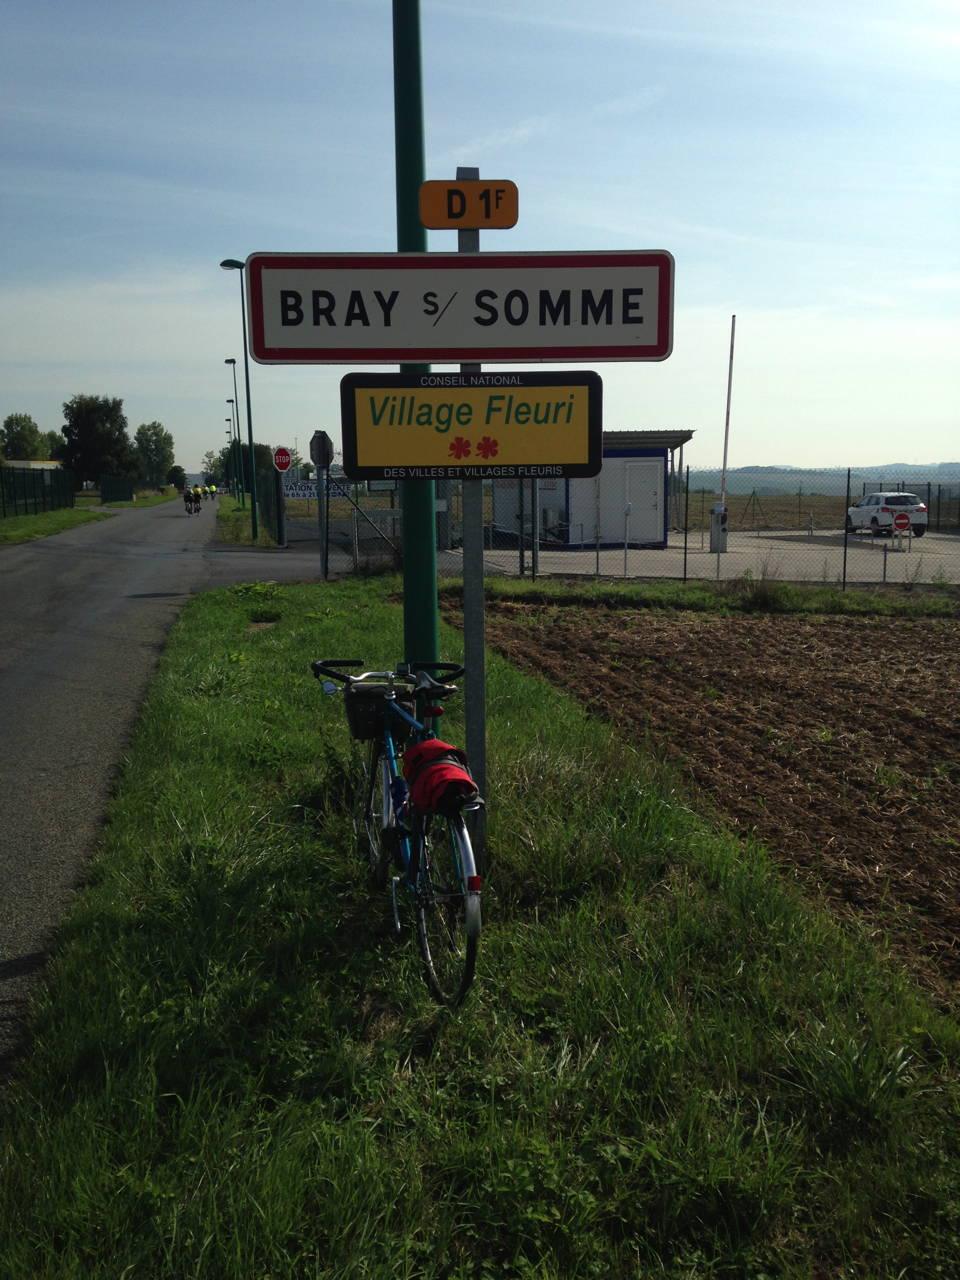 Bray sur Somme